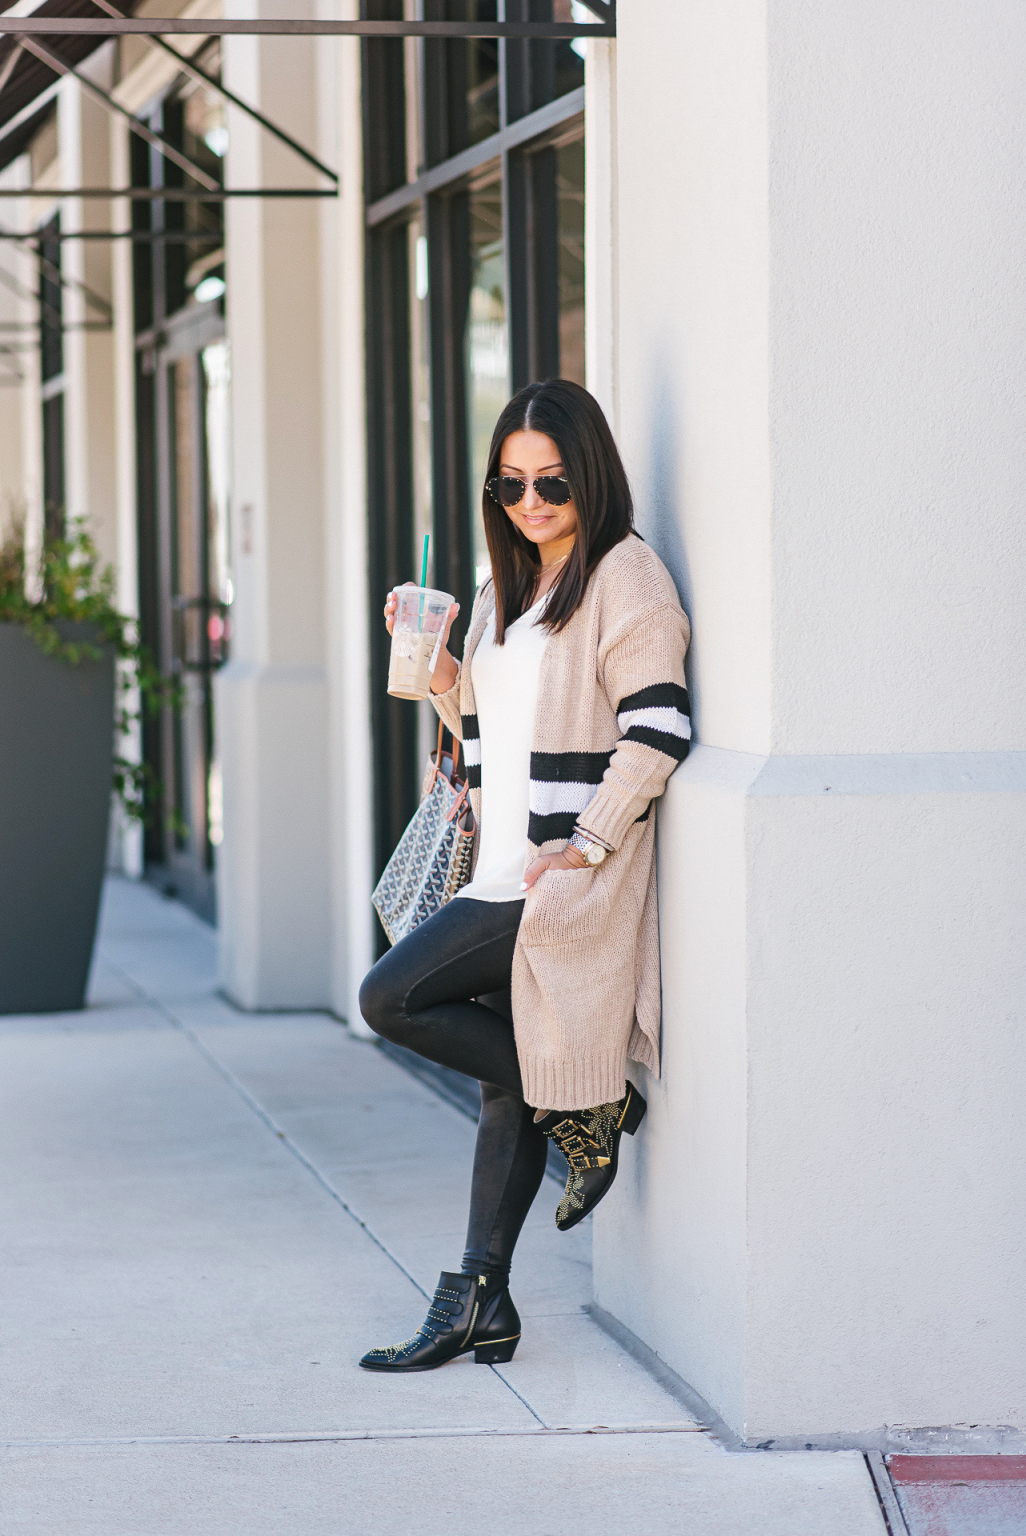 The Stripe Cardigan You Need | LuxMommy | Houston Fashion, Beauty and ...